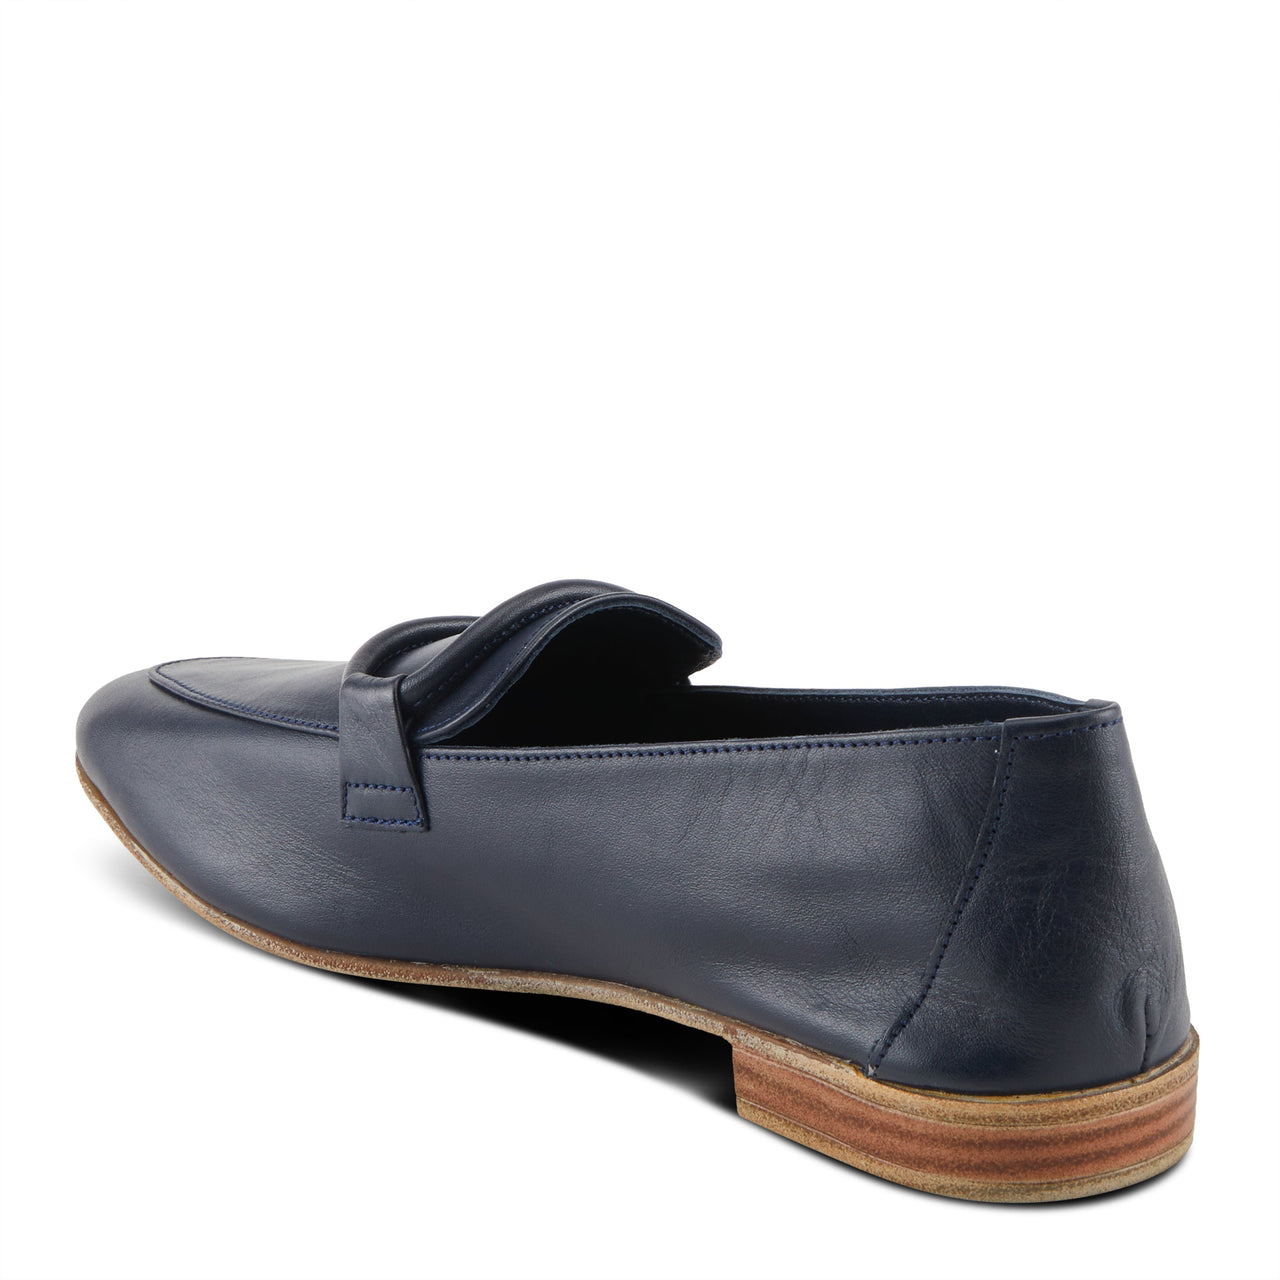 Black leather Spring Step Carrington shoes with cushioned insoles and slip-resistant soles for ultimate comfort and safety